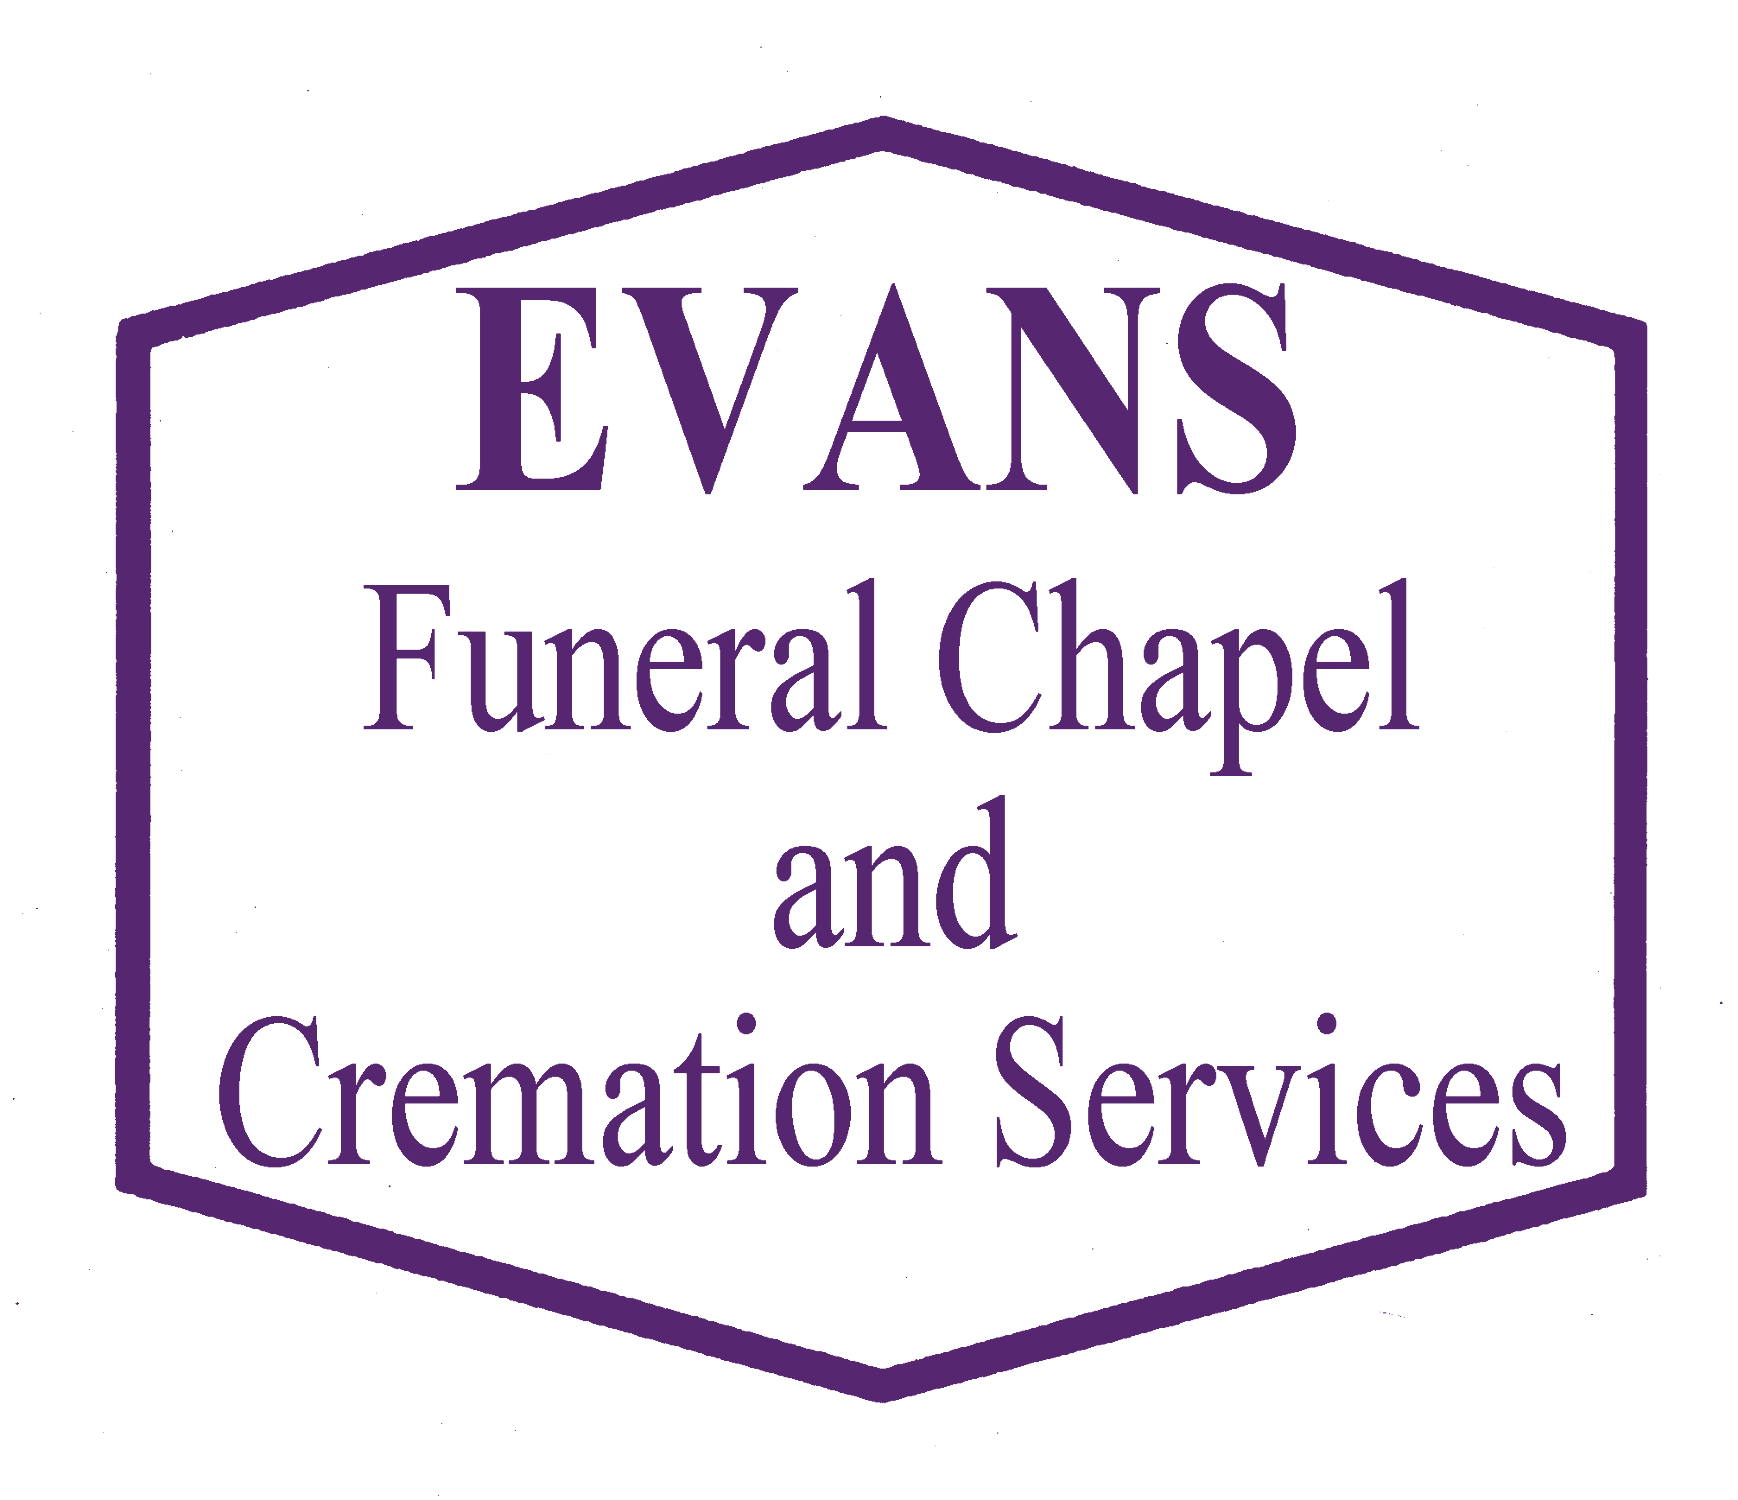 Evans Funeral Chapel and Cremation Services Logo